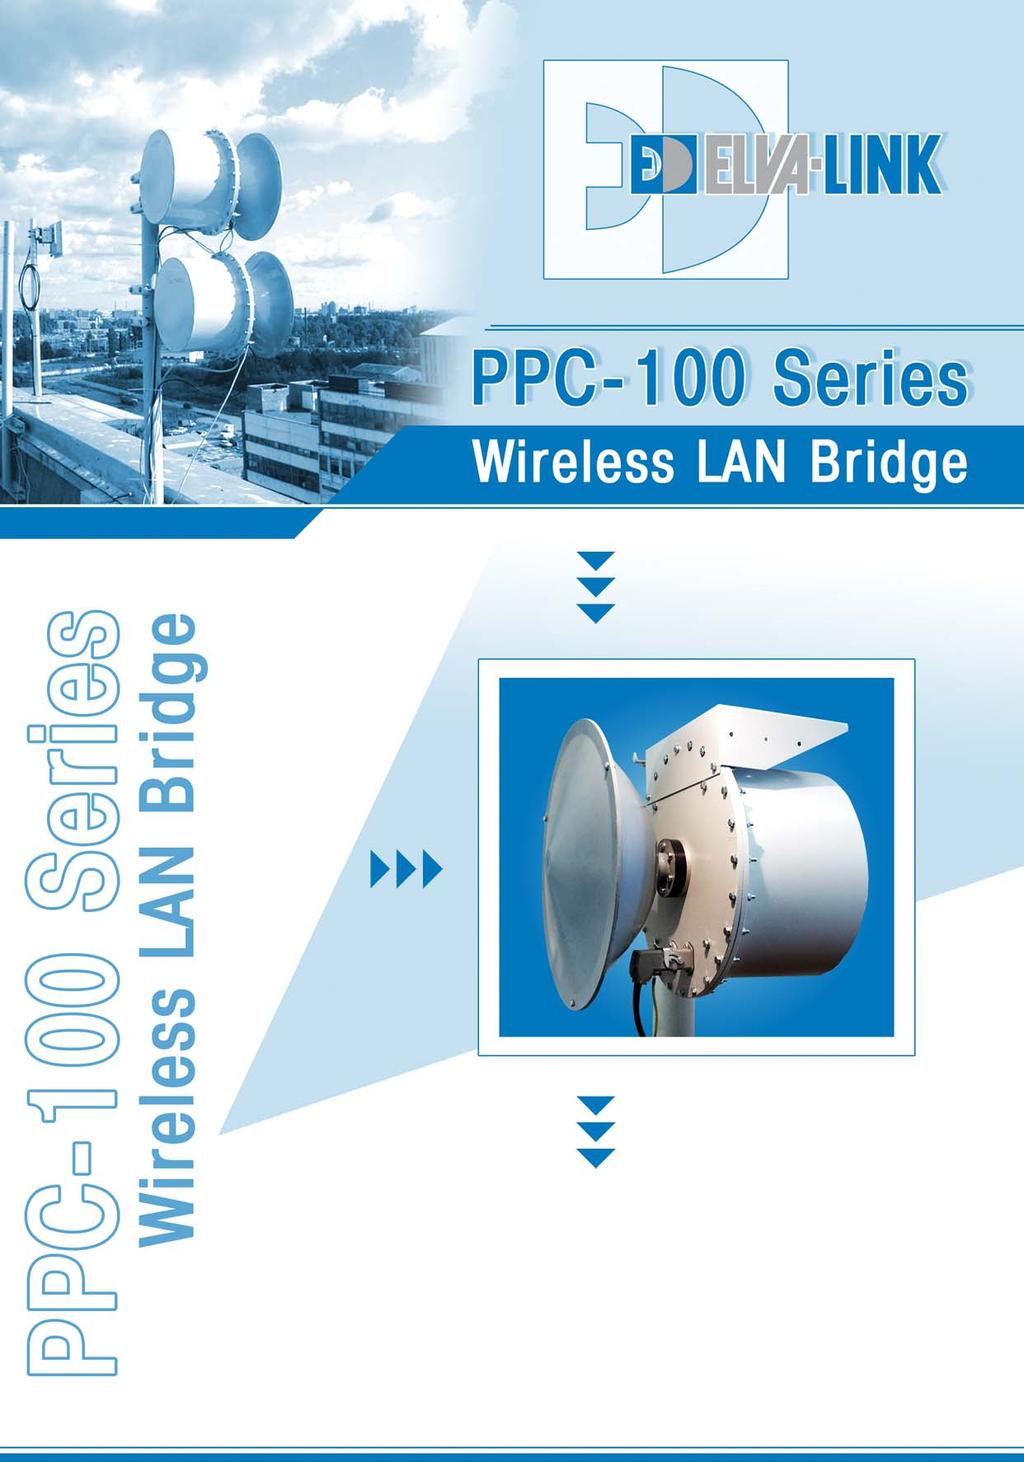 ElvaLink PPC-1 Series of mm-wave digital radios are designed to provide 1 Mbps connectivity to a wide variety of applications.